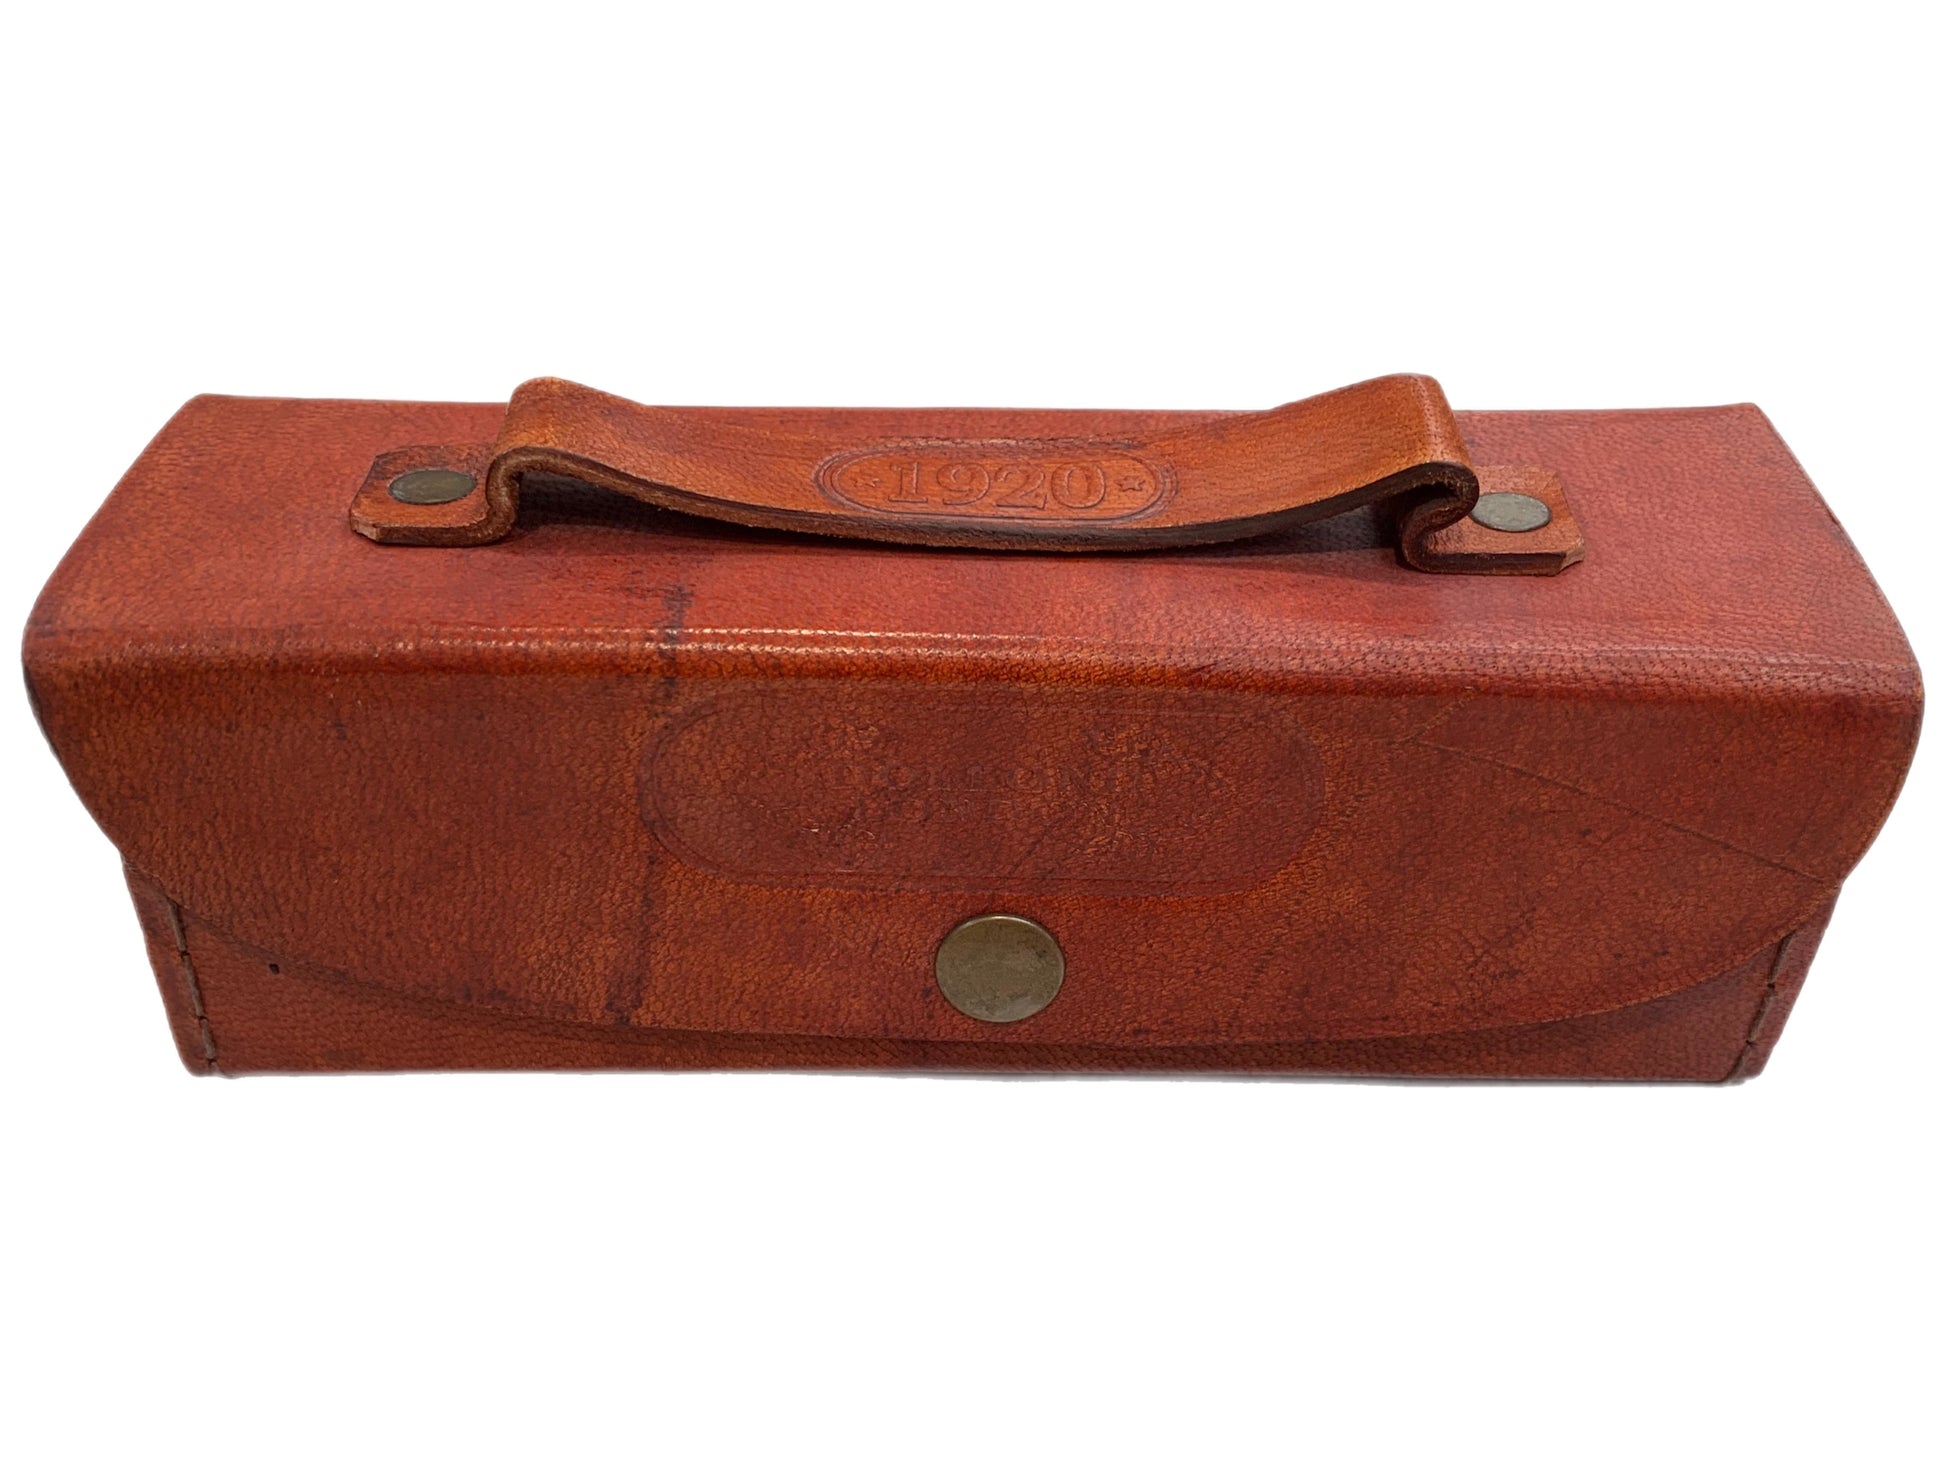 Dollond London leather case